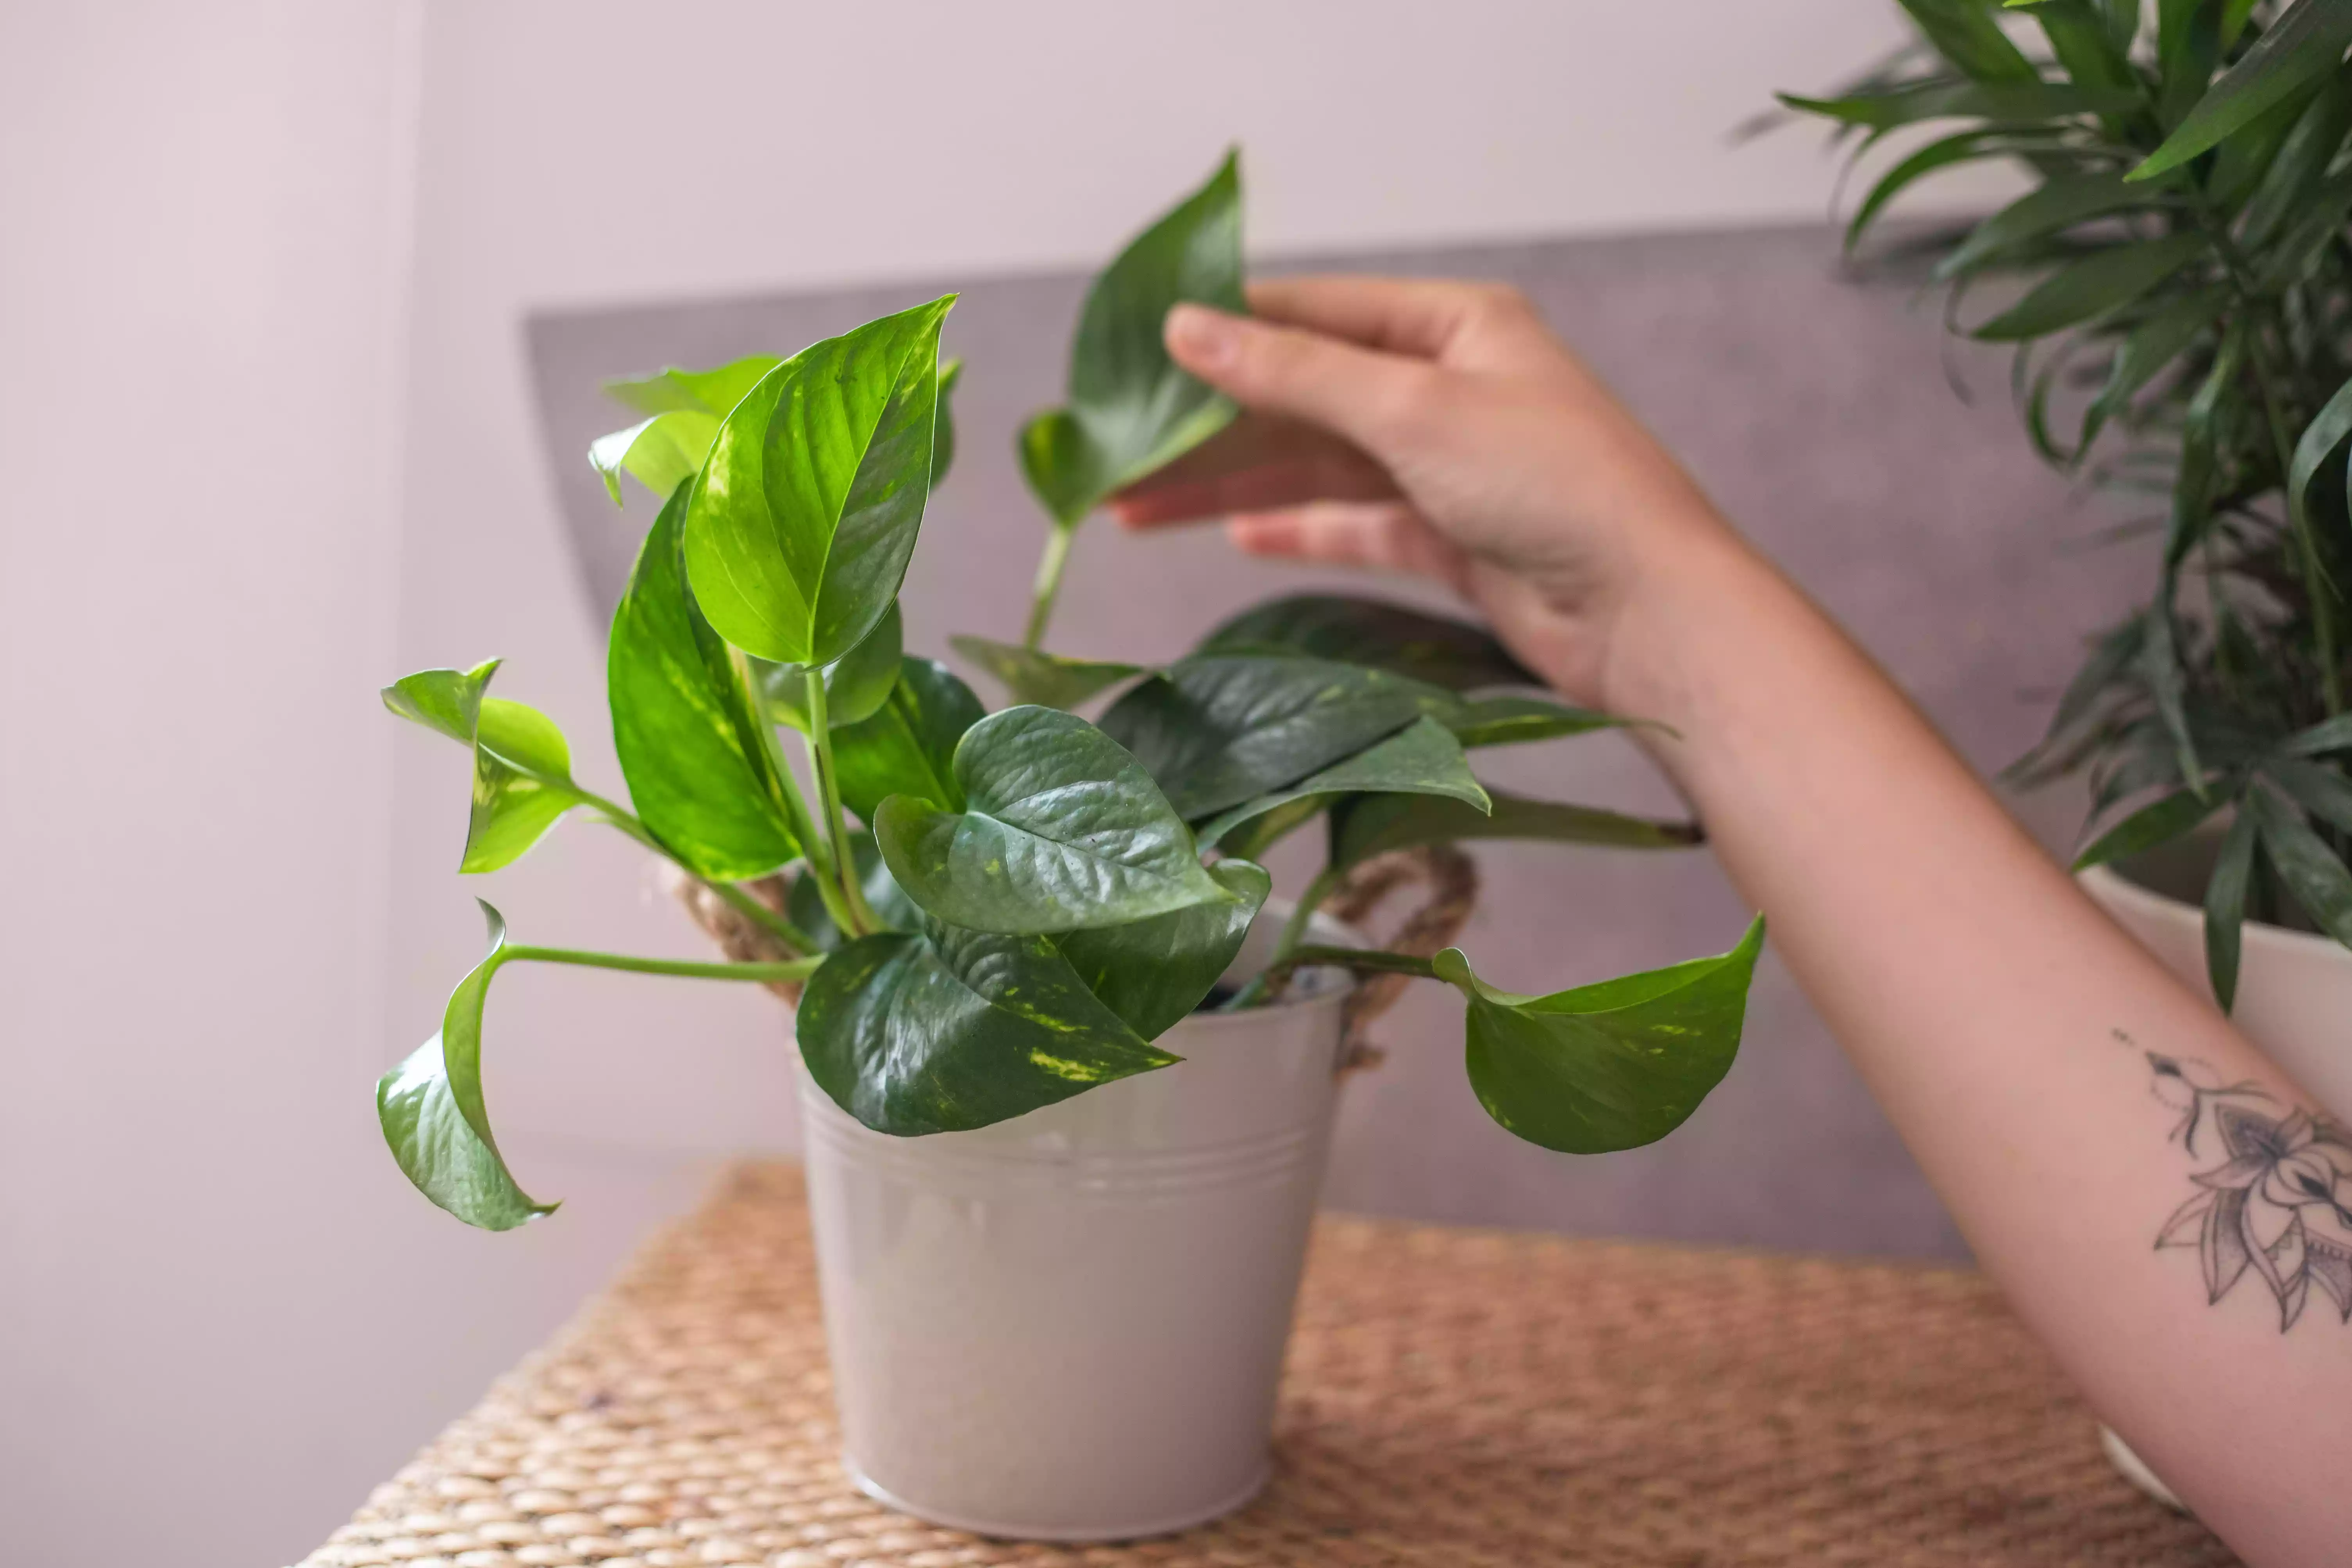 hand reaches out to caress leaf of golden pothos plant in metal container